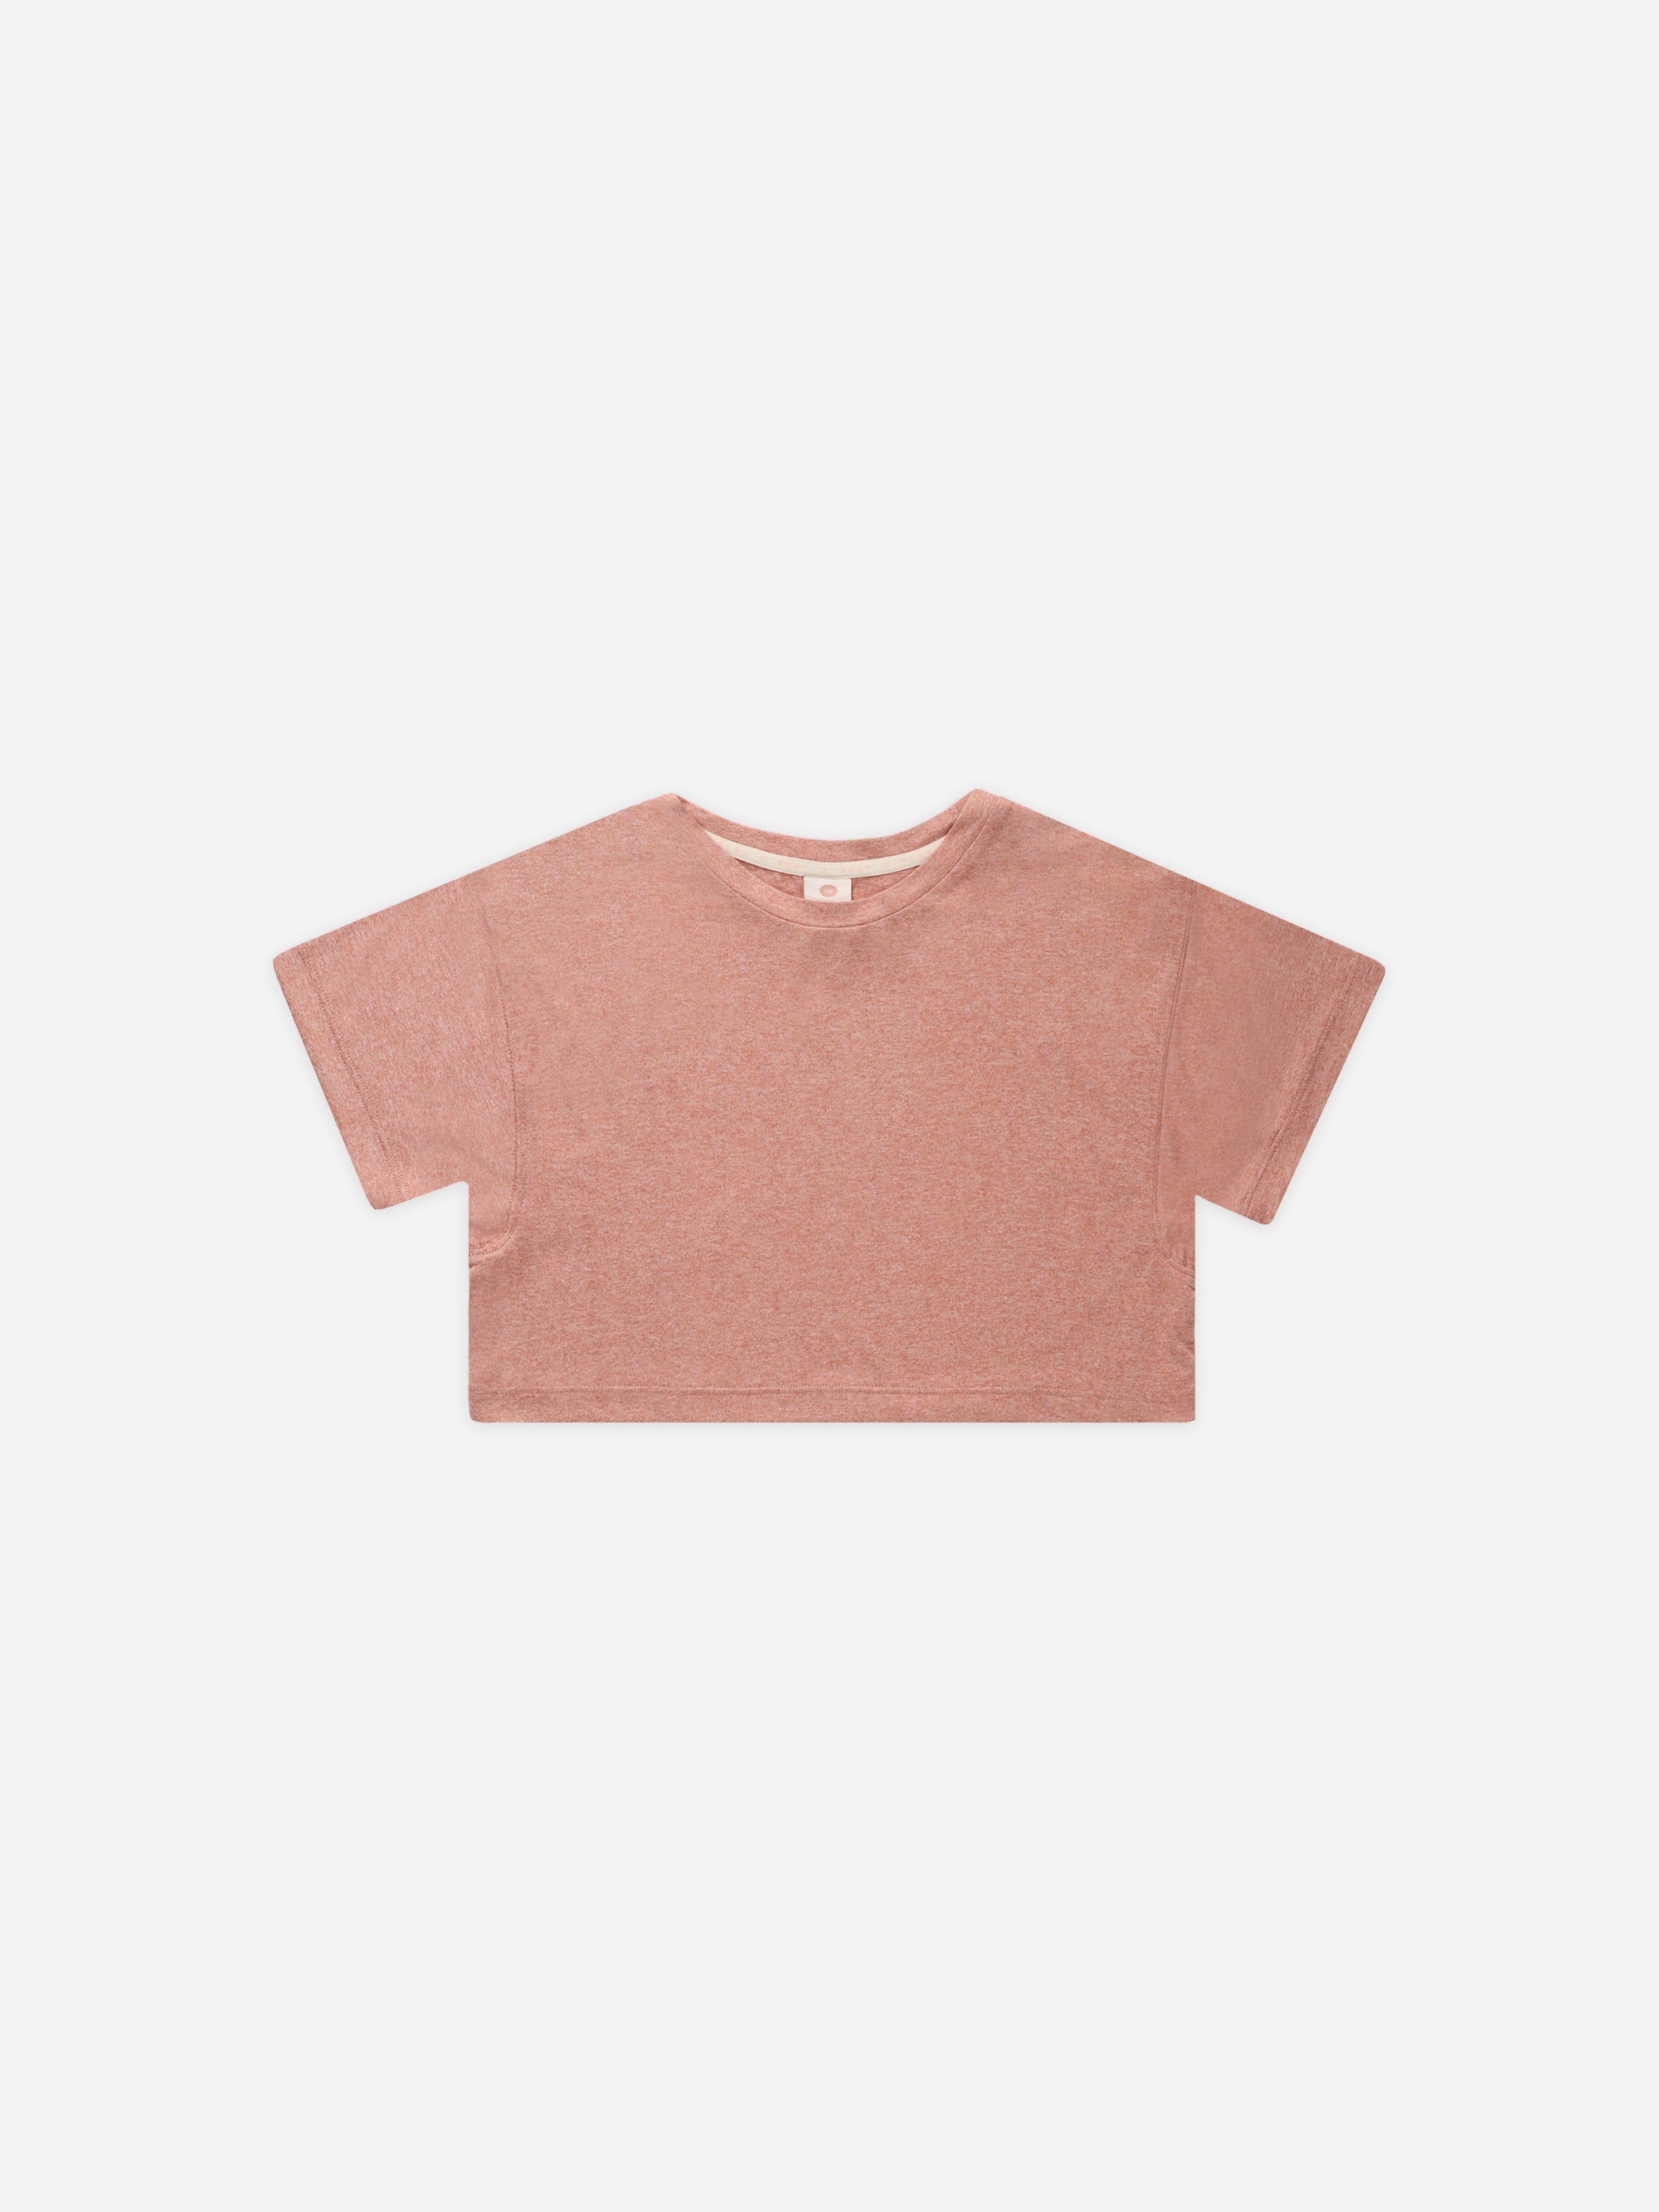 Tech Crop Tee || Heathered Lipstick - Rylee + Cru | Kids Clothes | Trendy Baby Clothes | Modern Infant Outfits |